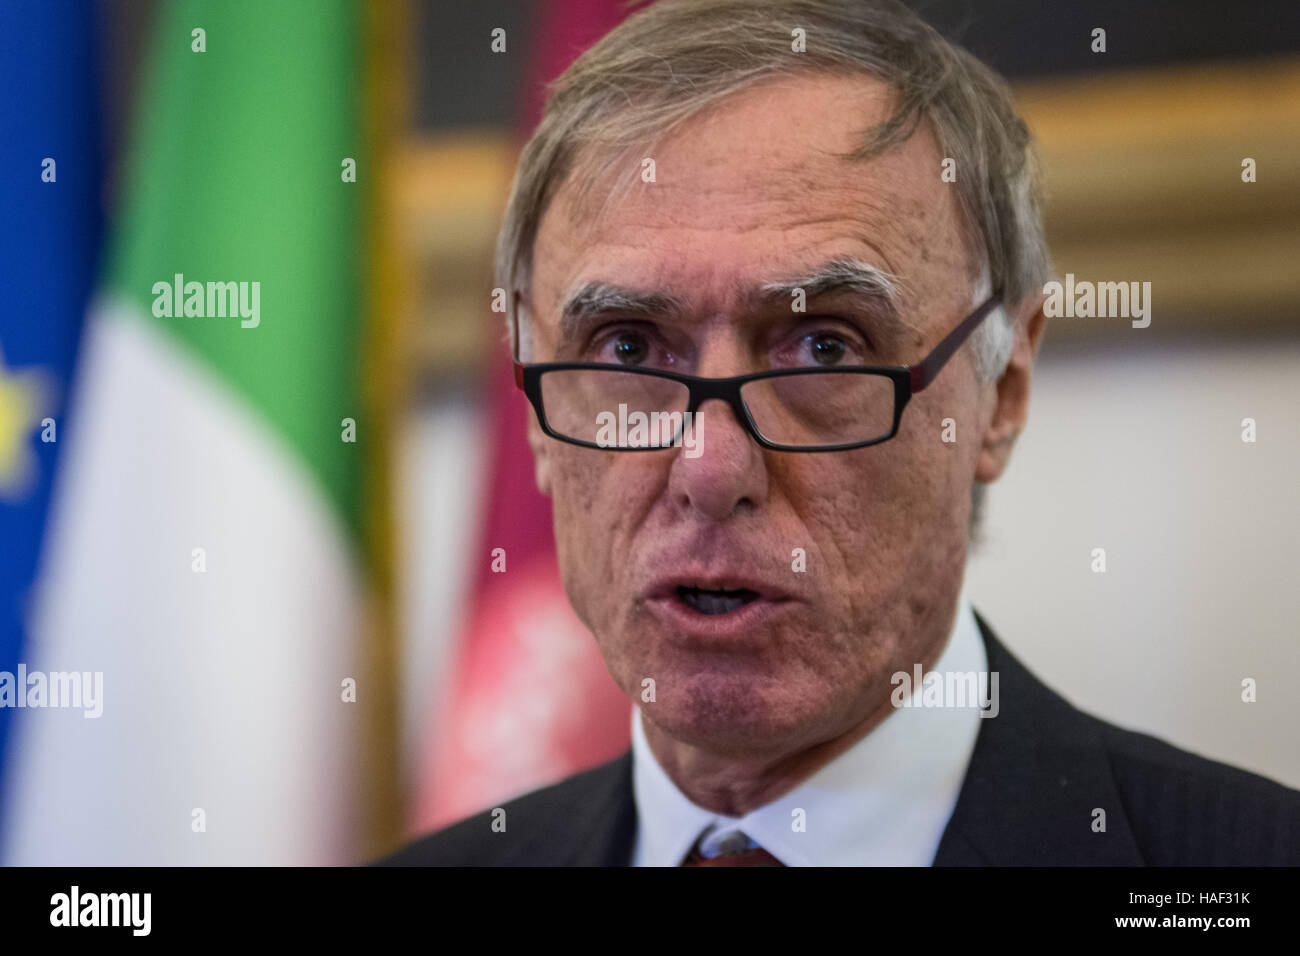 Rome, Italy. 29th Nov, 2016. Giorgio Alleva during the presentation of the 'First statistical report on the metropolitan area of Rome' at the Capitol. © Andrea Ronchini/Pacific Press/Alamy Live News Stock Photo